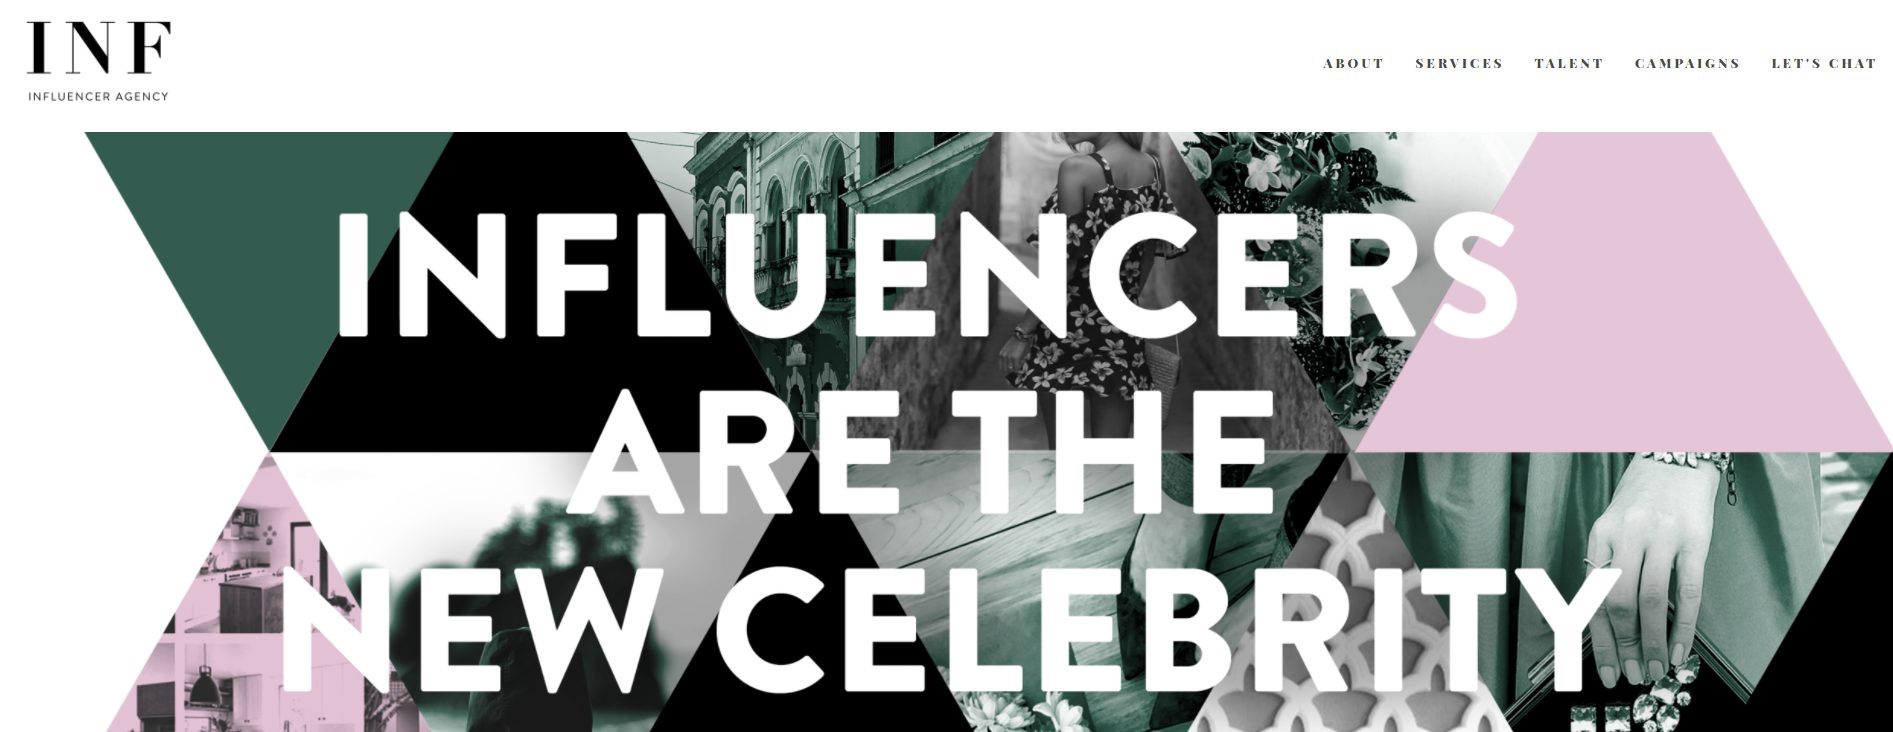 INF Influencer Agency